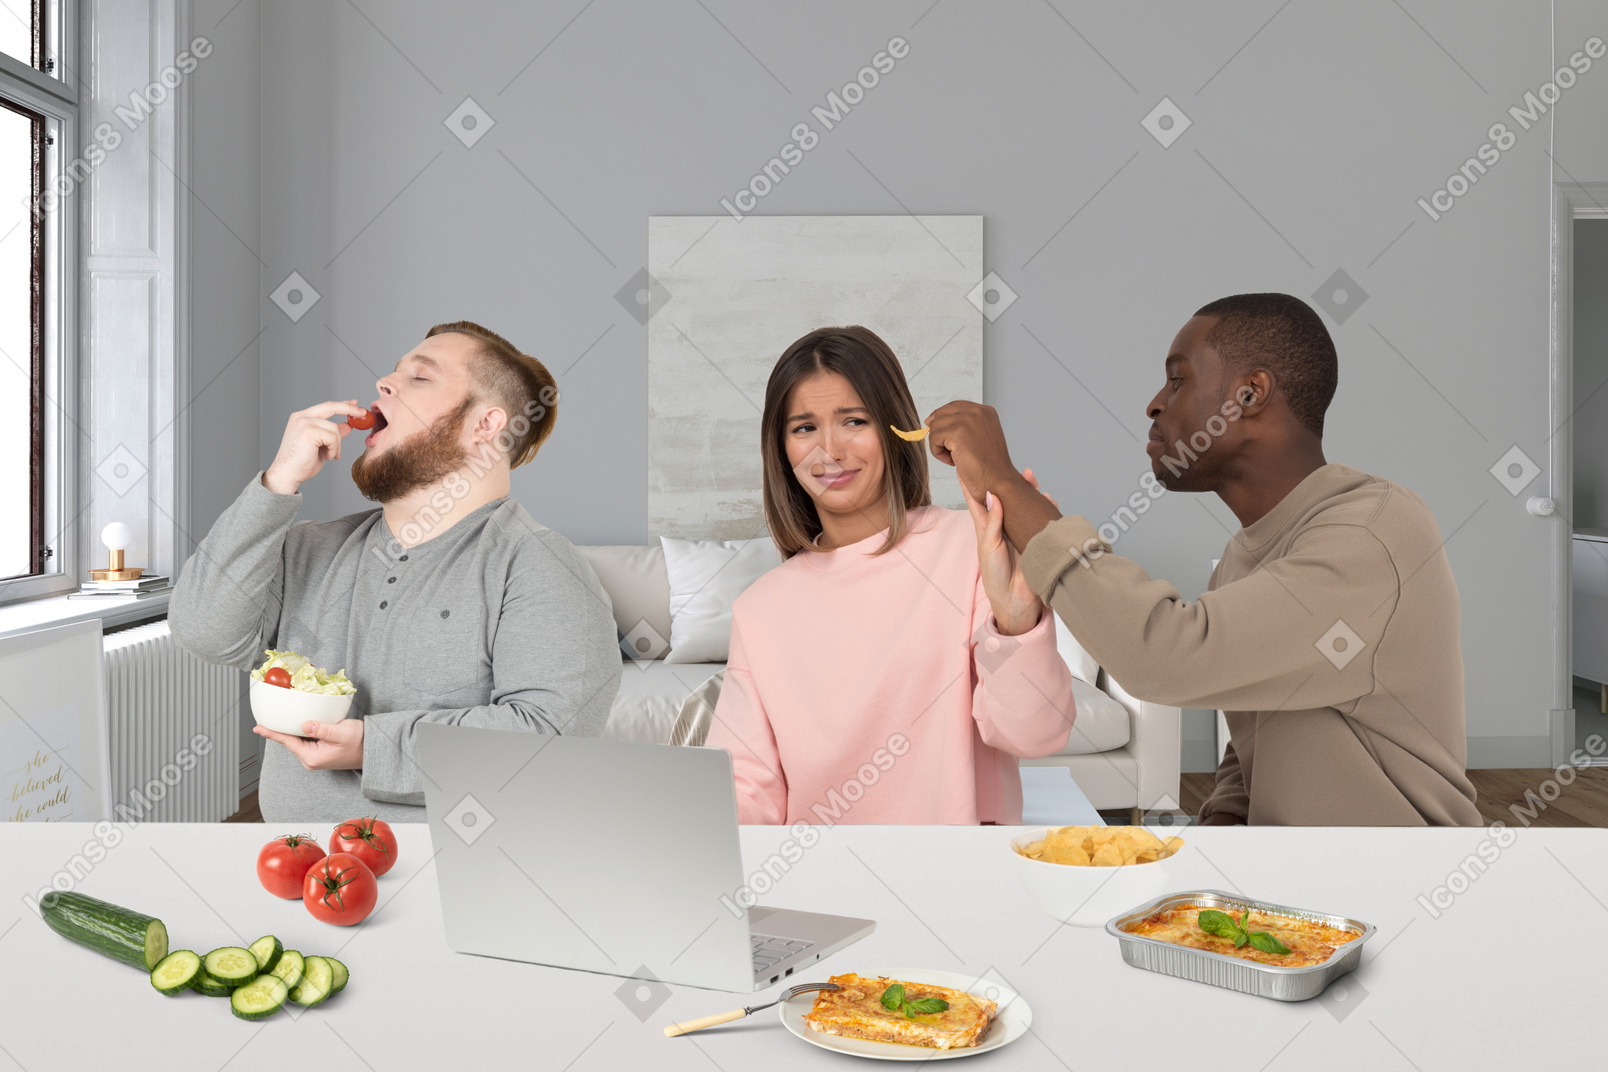 Friends sitting at the table and having both healthy and unhealthy snacks